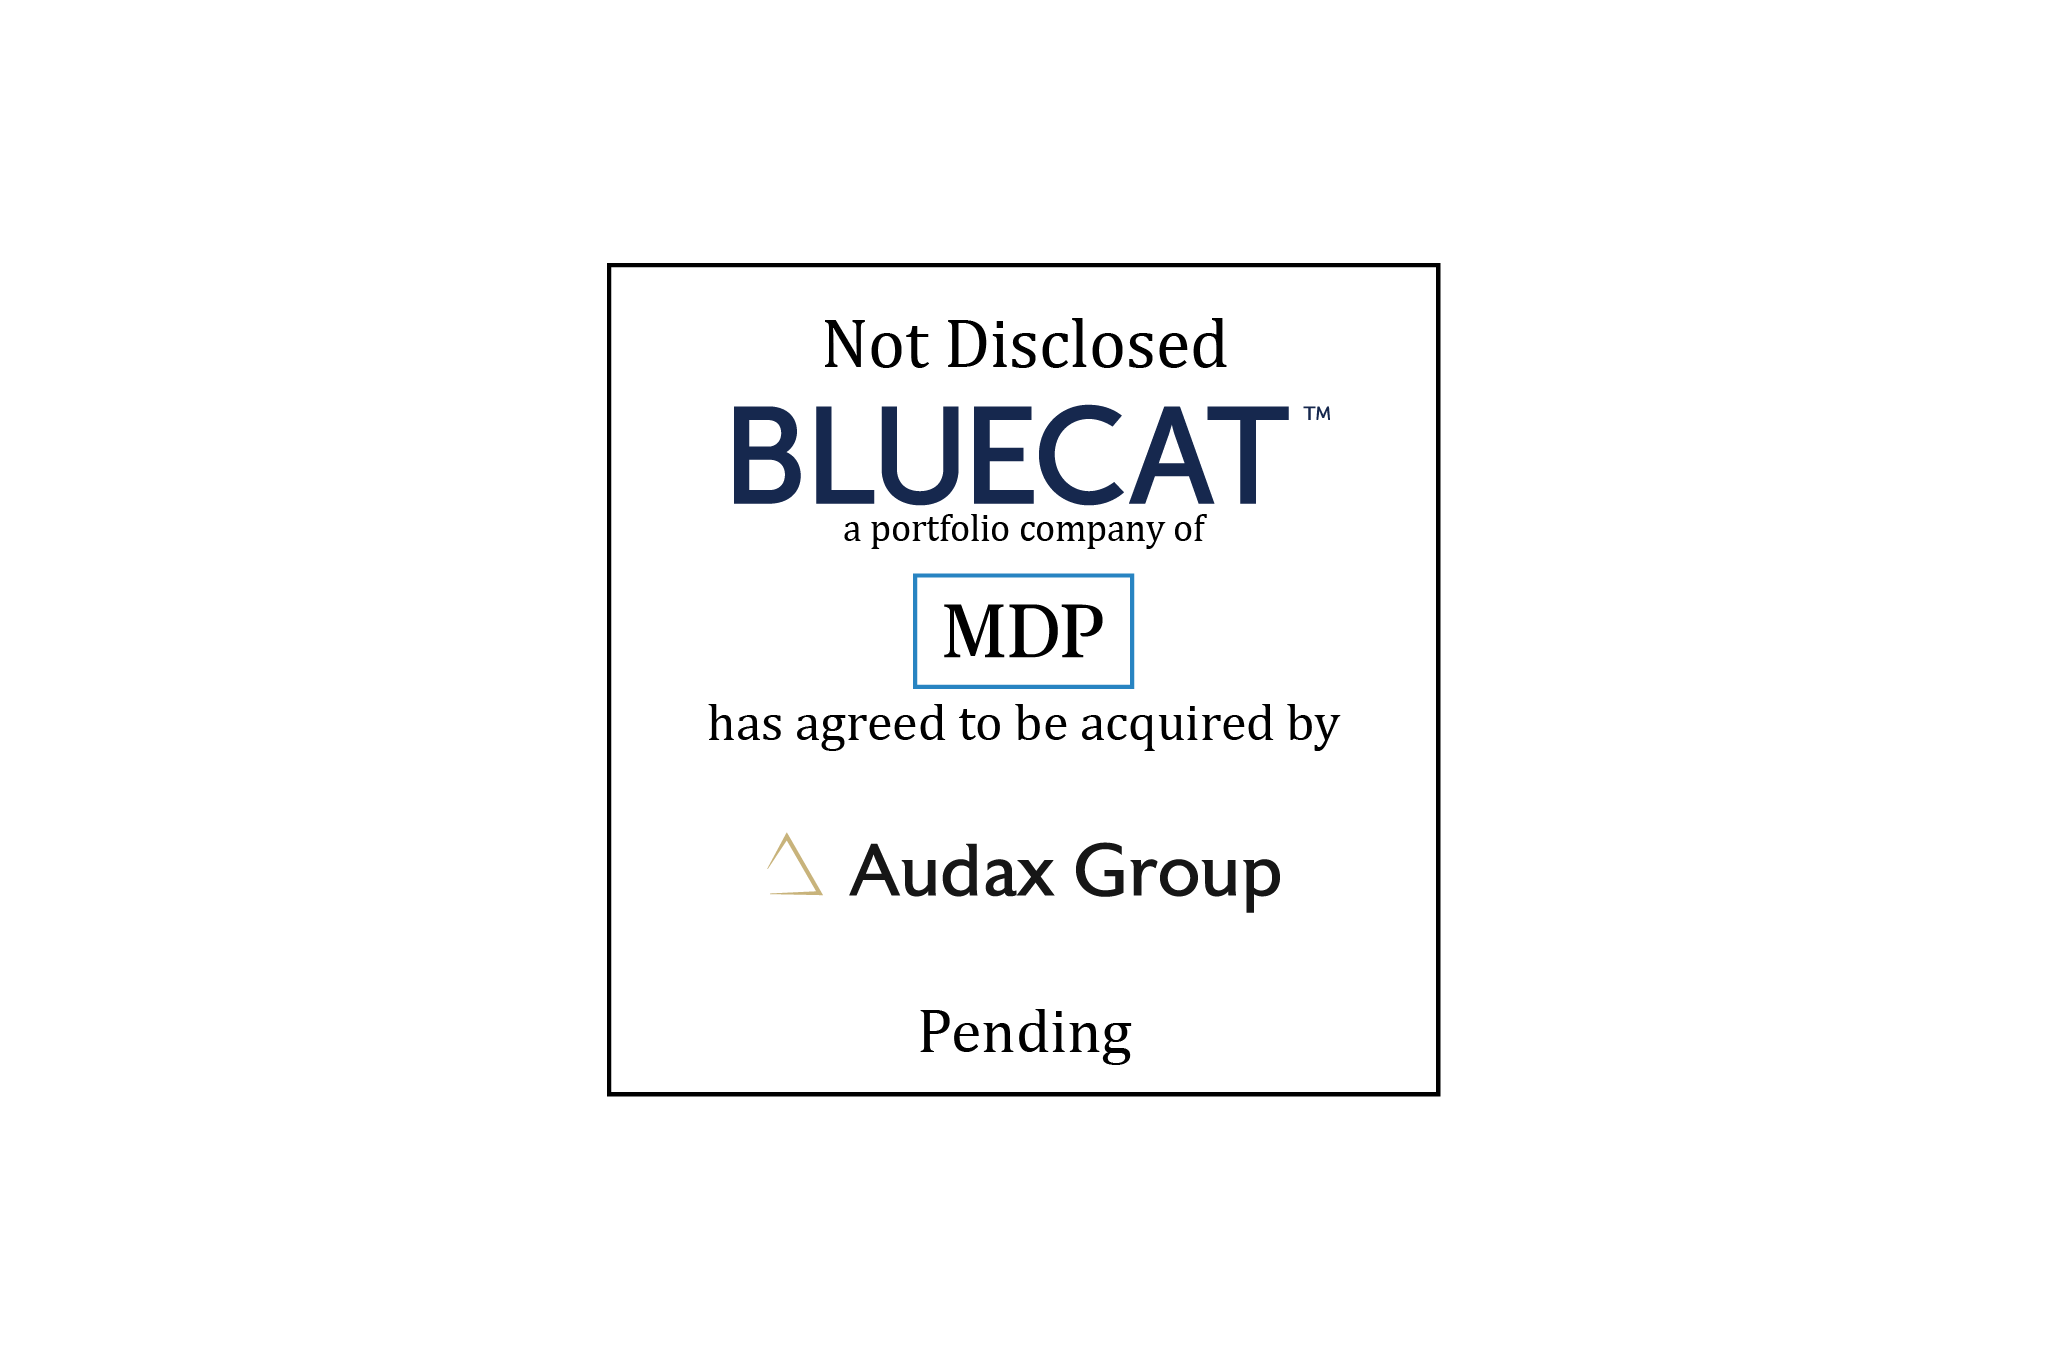 Not disclosed | BLUECAT a portfolio company of MDP has agreed to be acquired by Audax Group | Pending